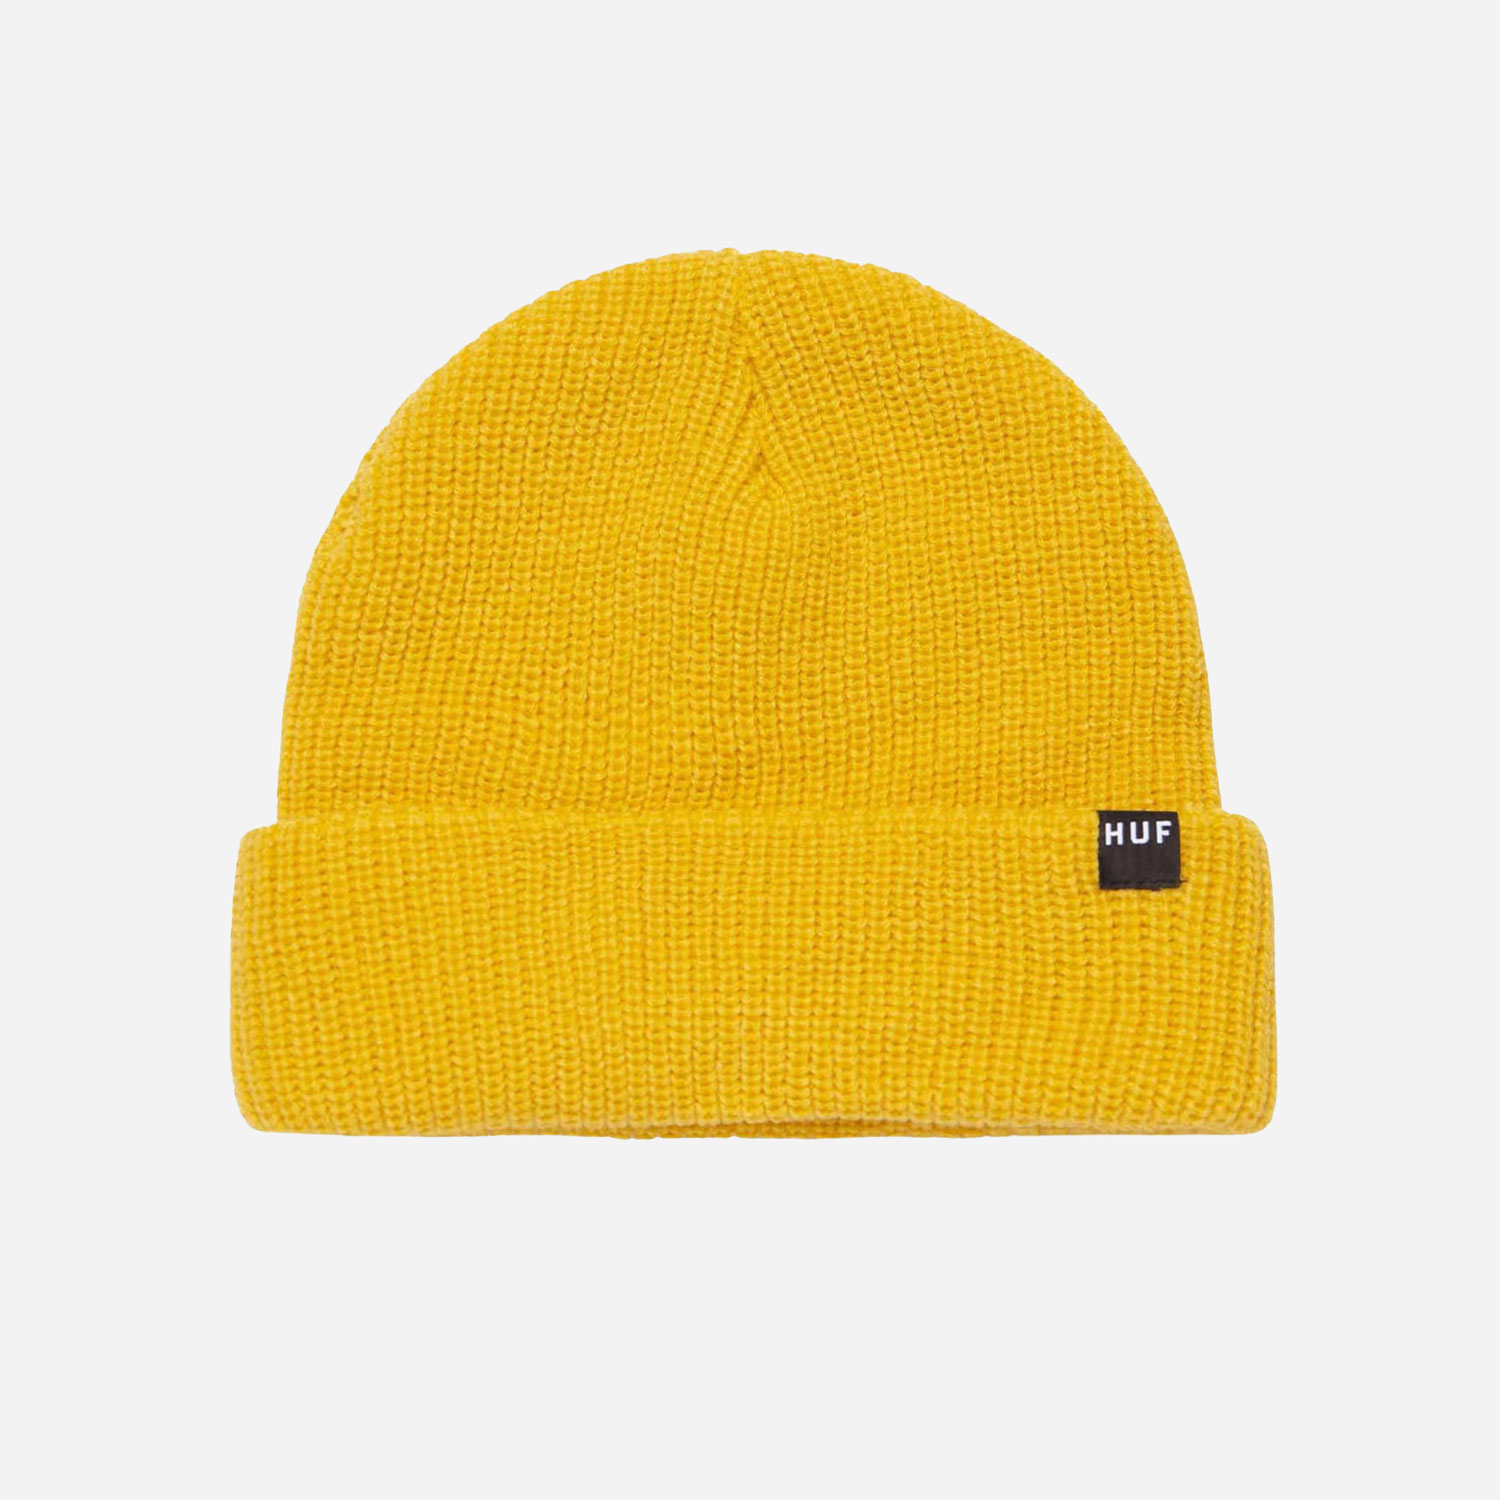 HUF Usual Beanie - Gold